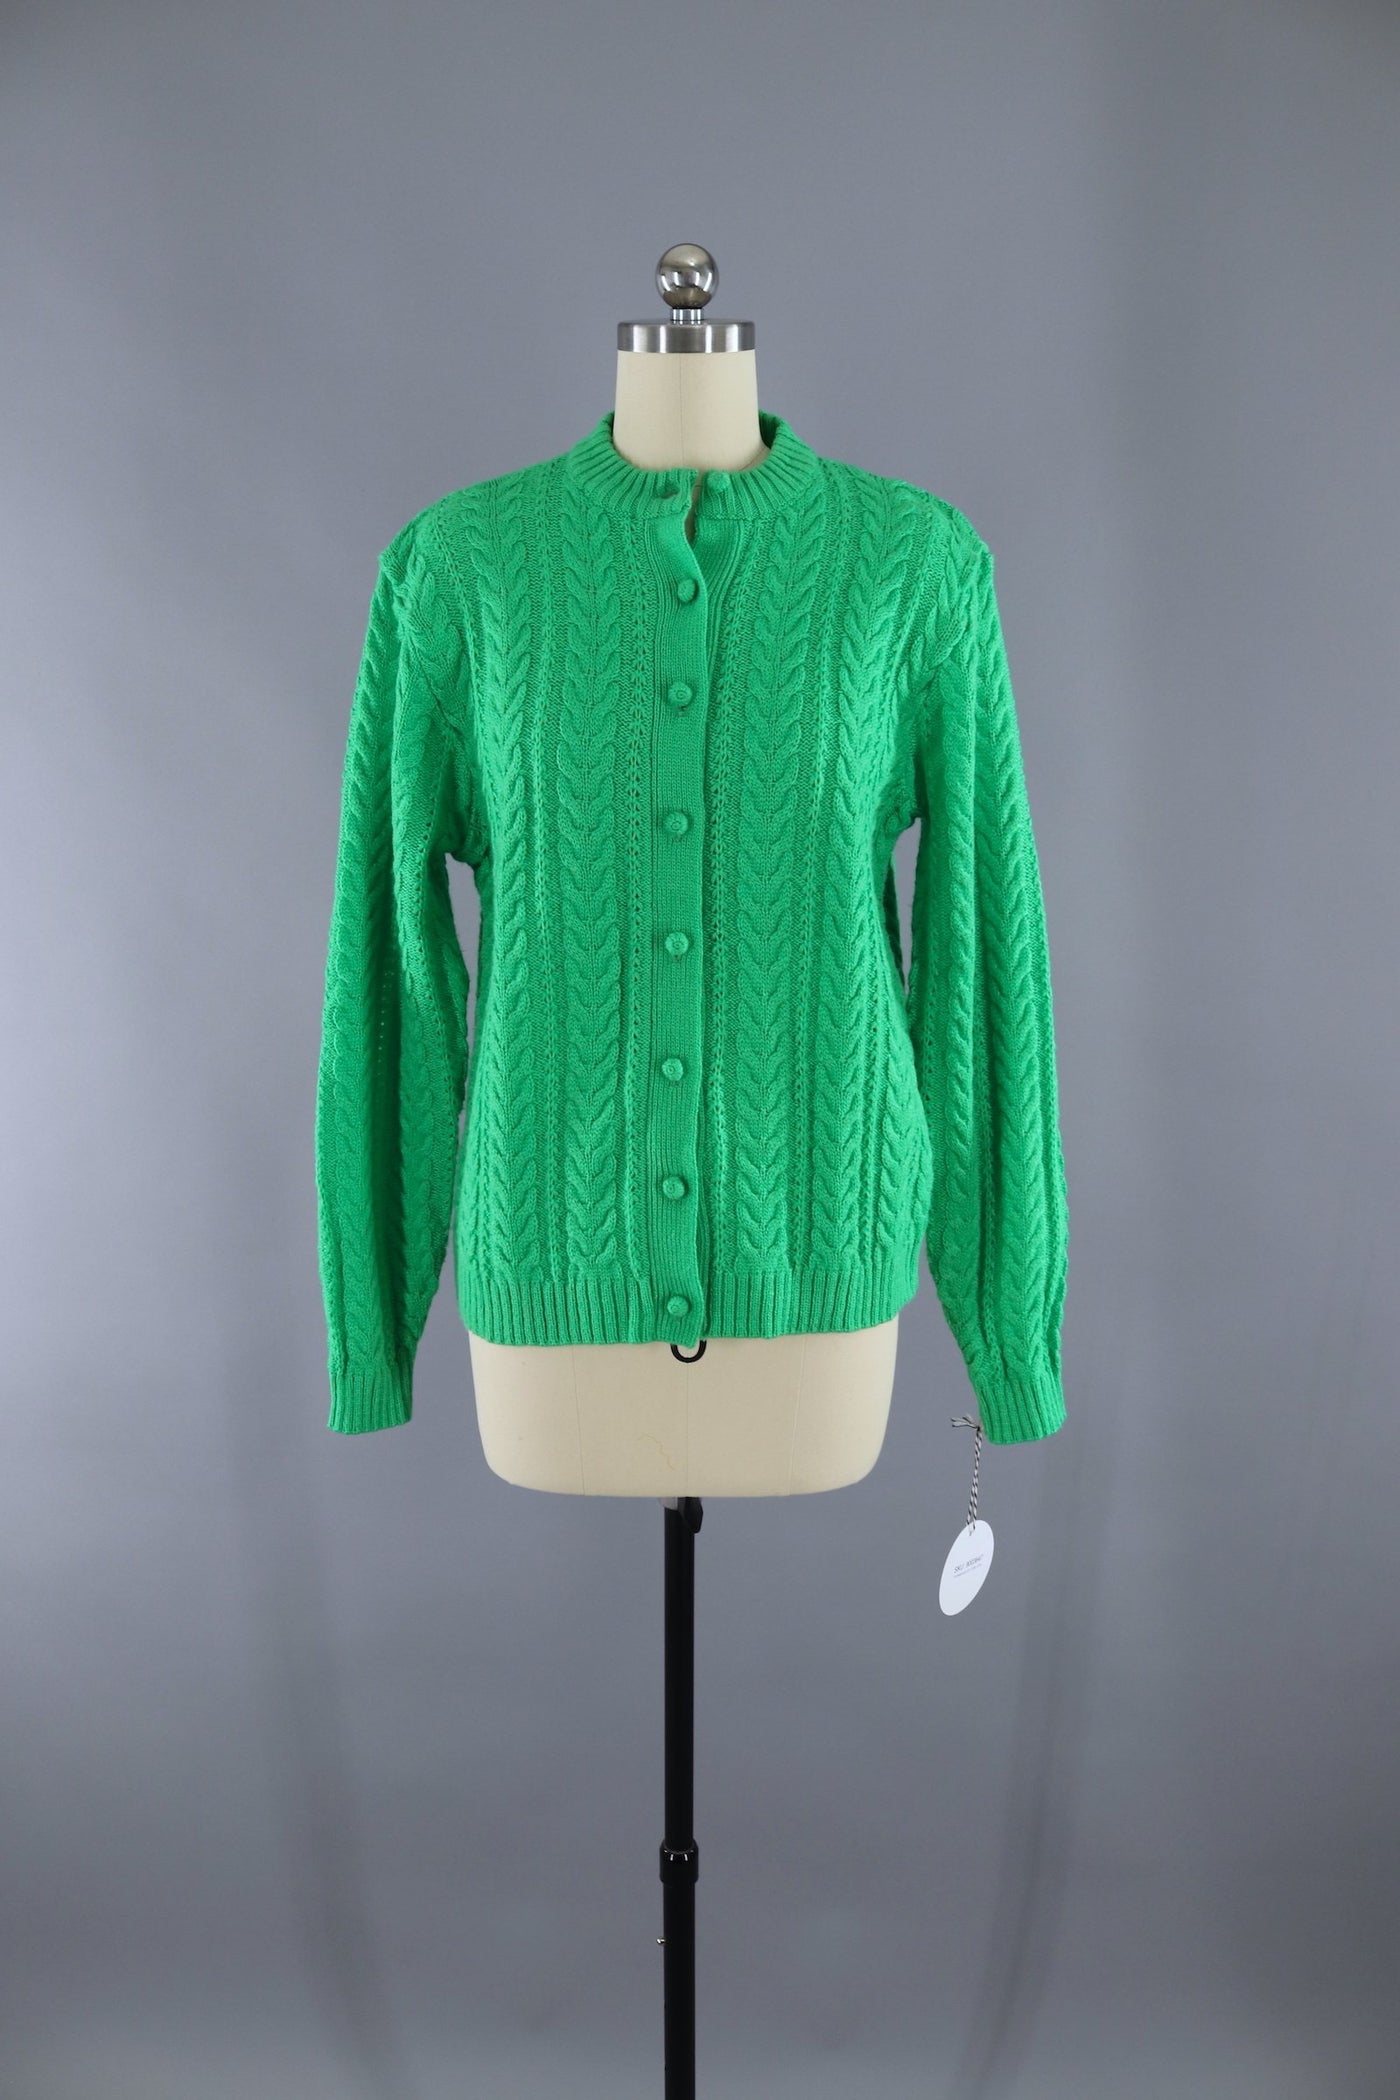 Vintage Kelly Green Cable Knit Cardigan Sweater - ThisBlueBird